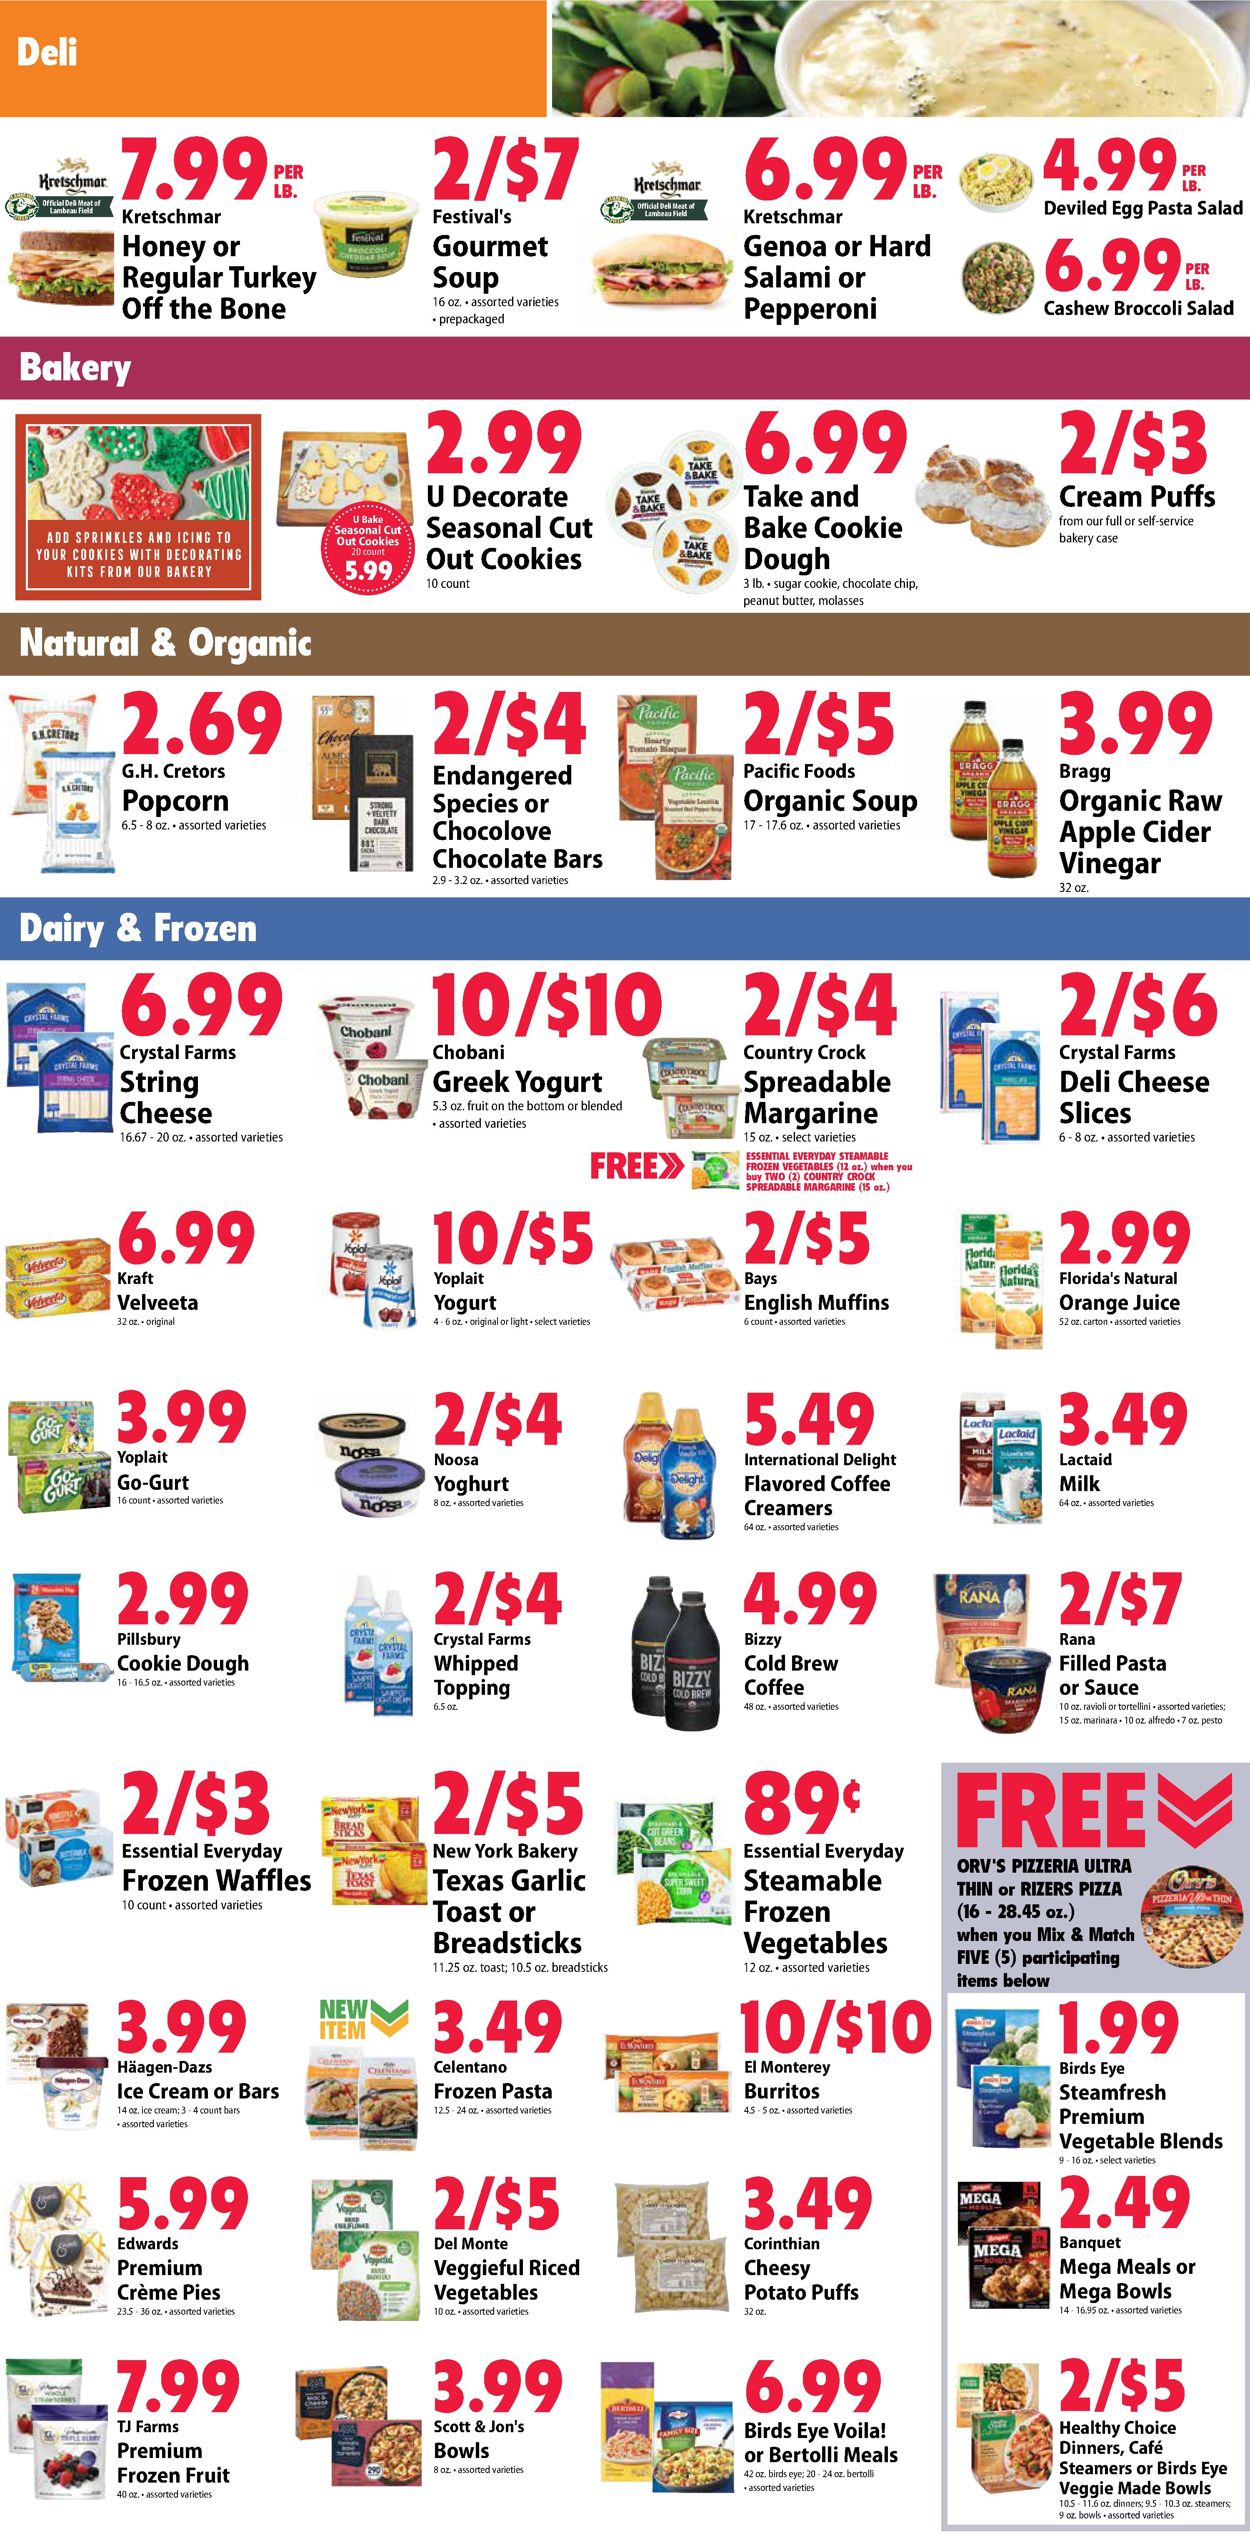 Festival Foods HOLIDAYS 2021 Weekly Ad Circular - valid 12/01-12/07/2021 (Page 3)